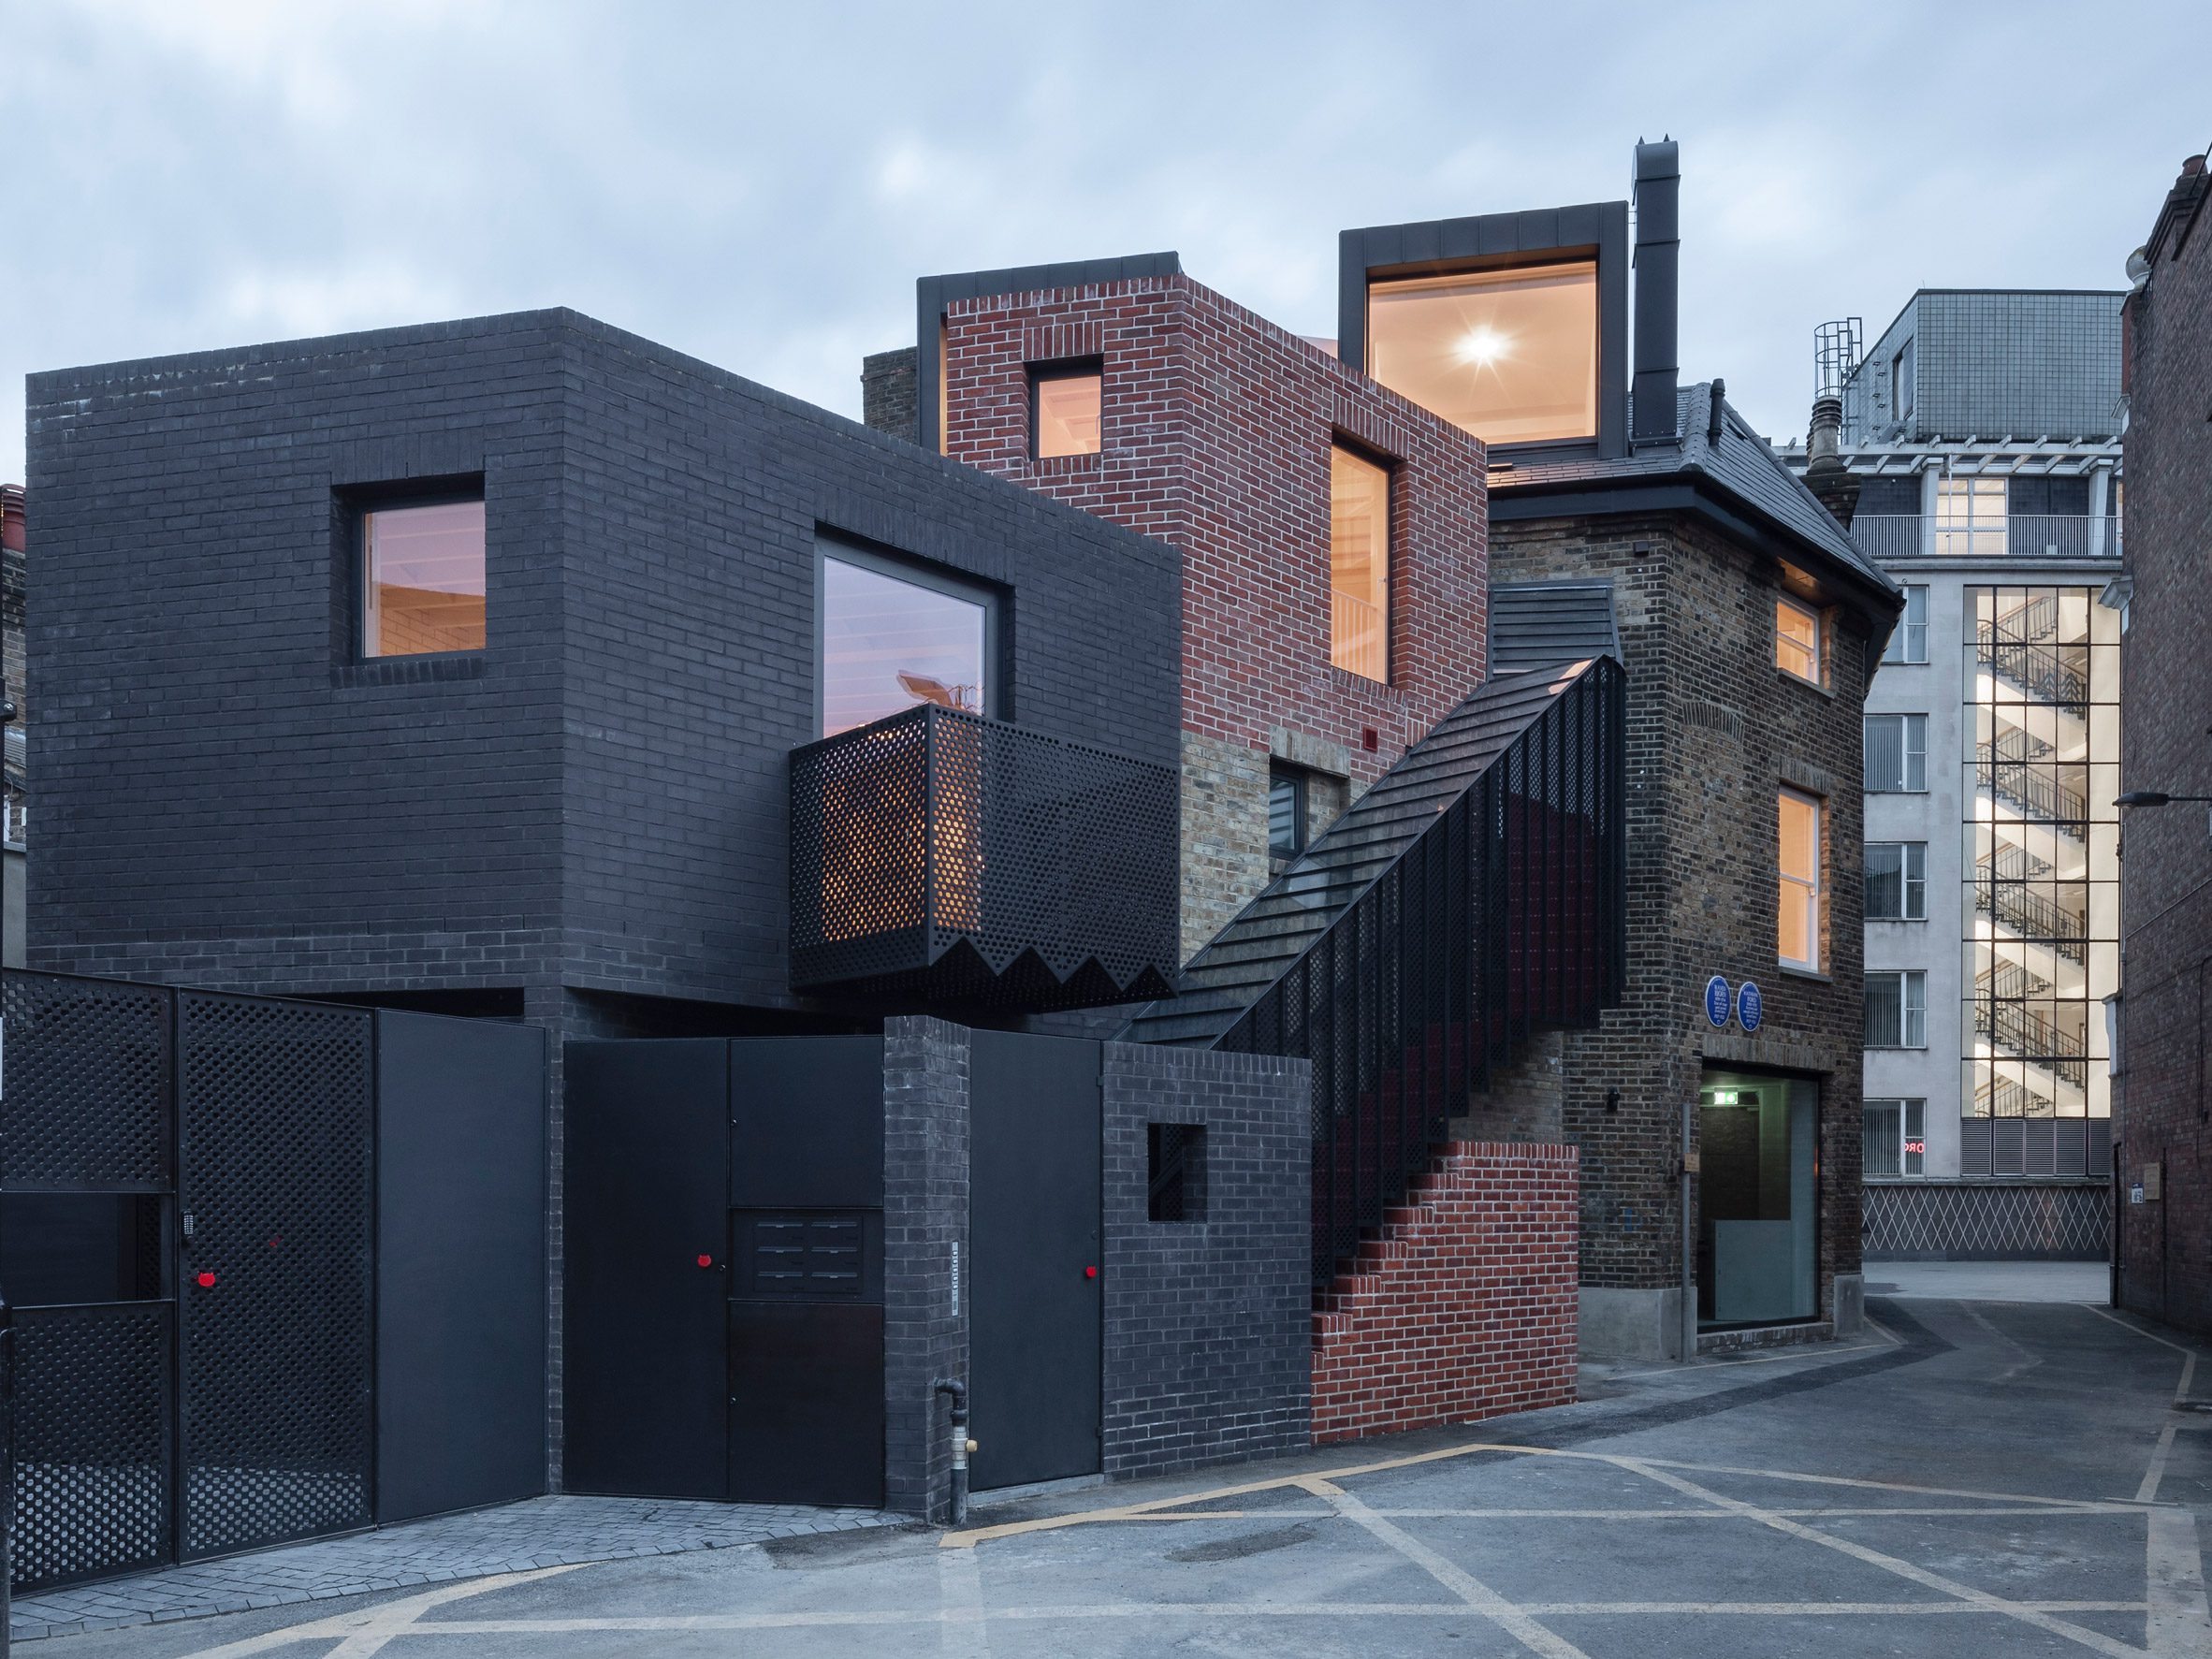 Night view of The Queen of Catford by Tsuruta Architects